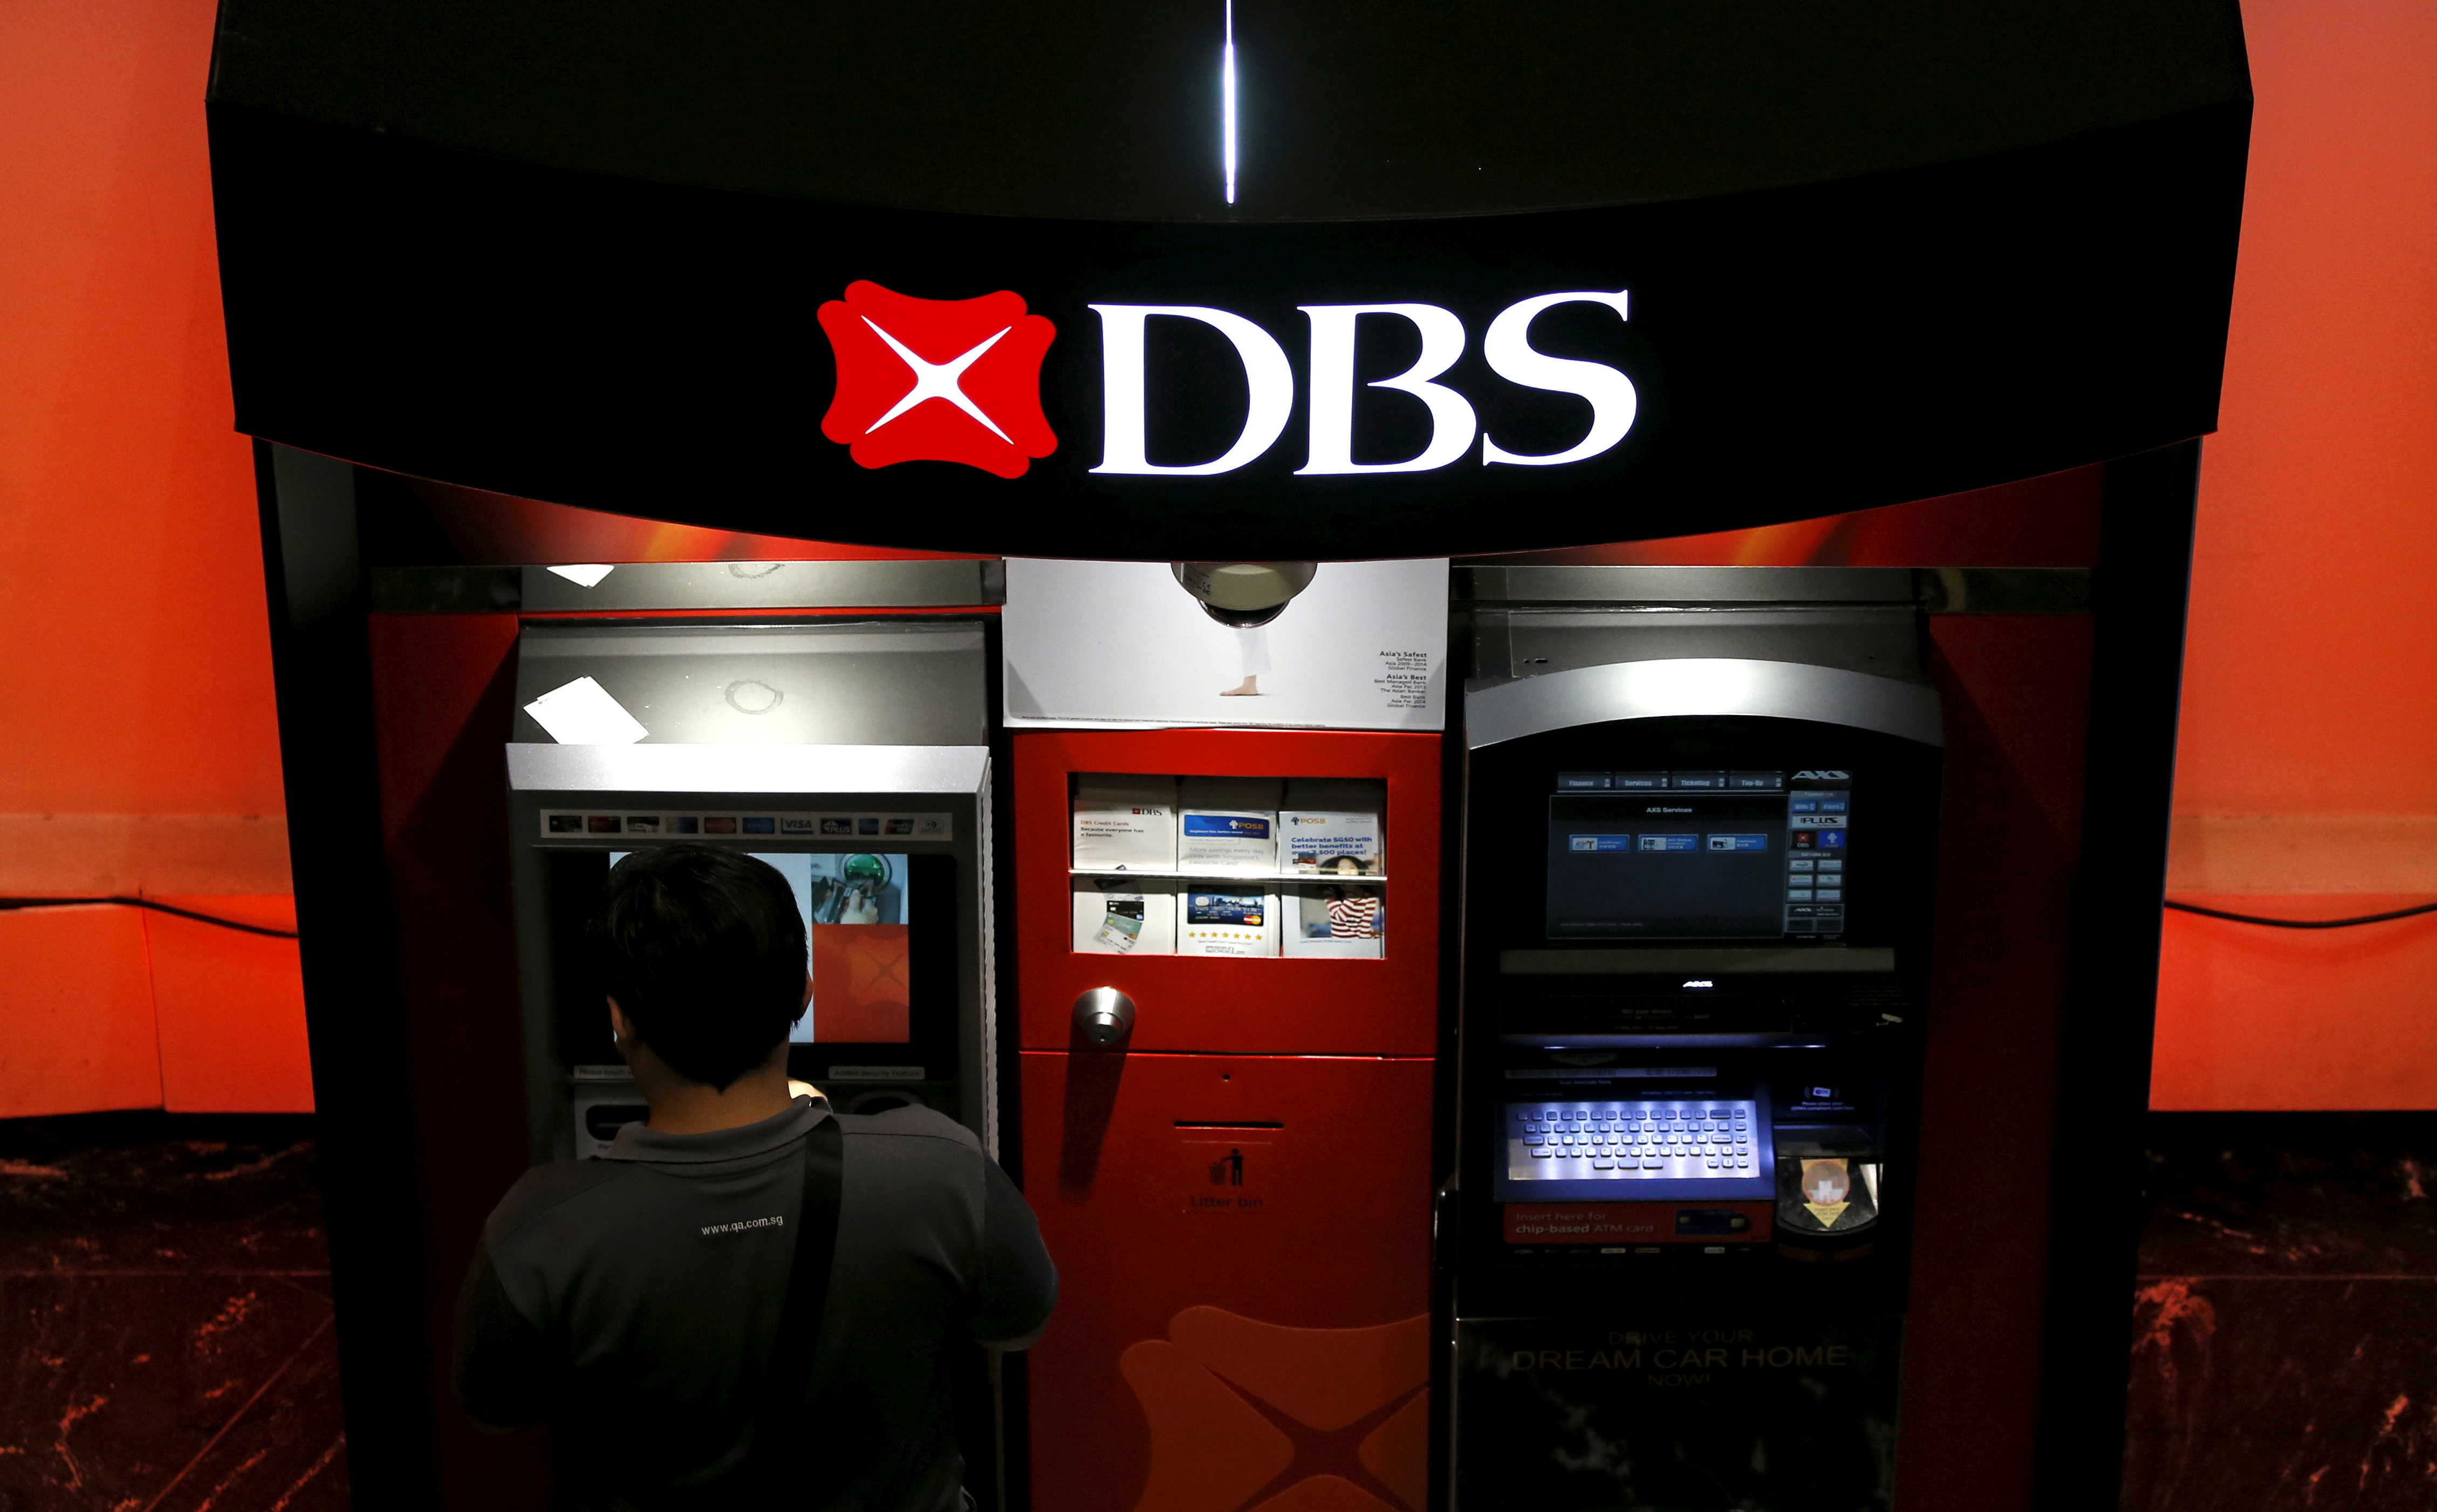 A man uses a DBS automated teller machine in Singapore